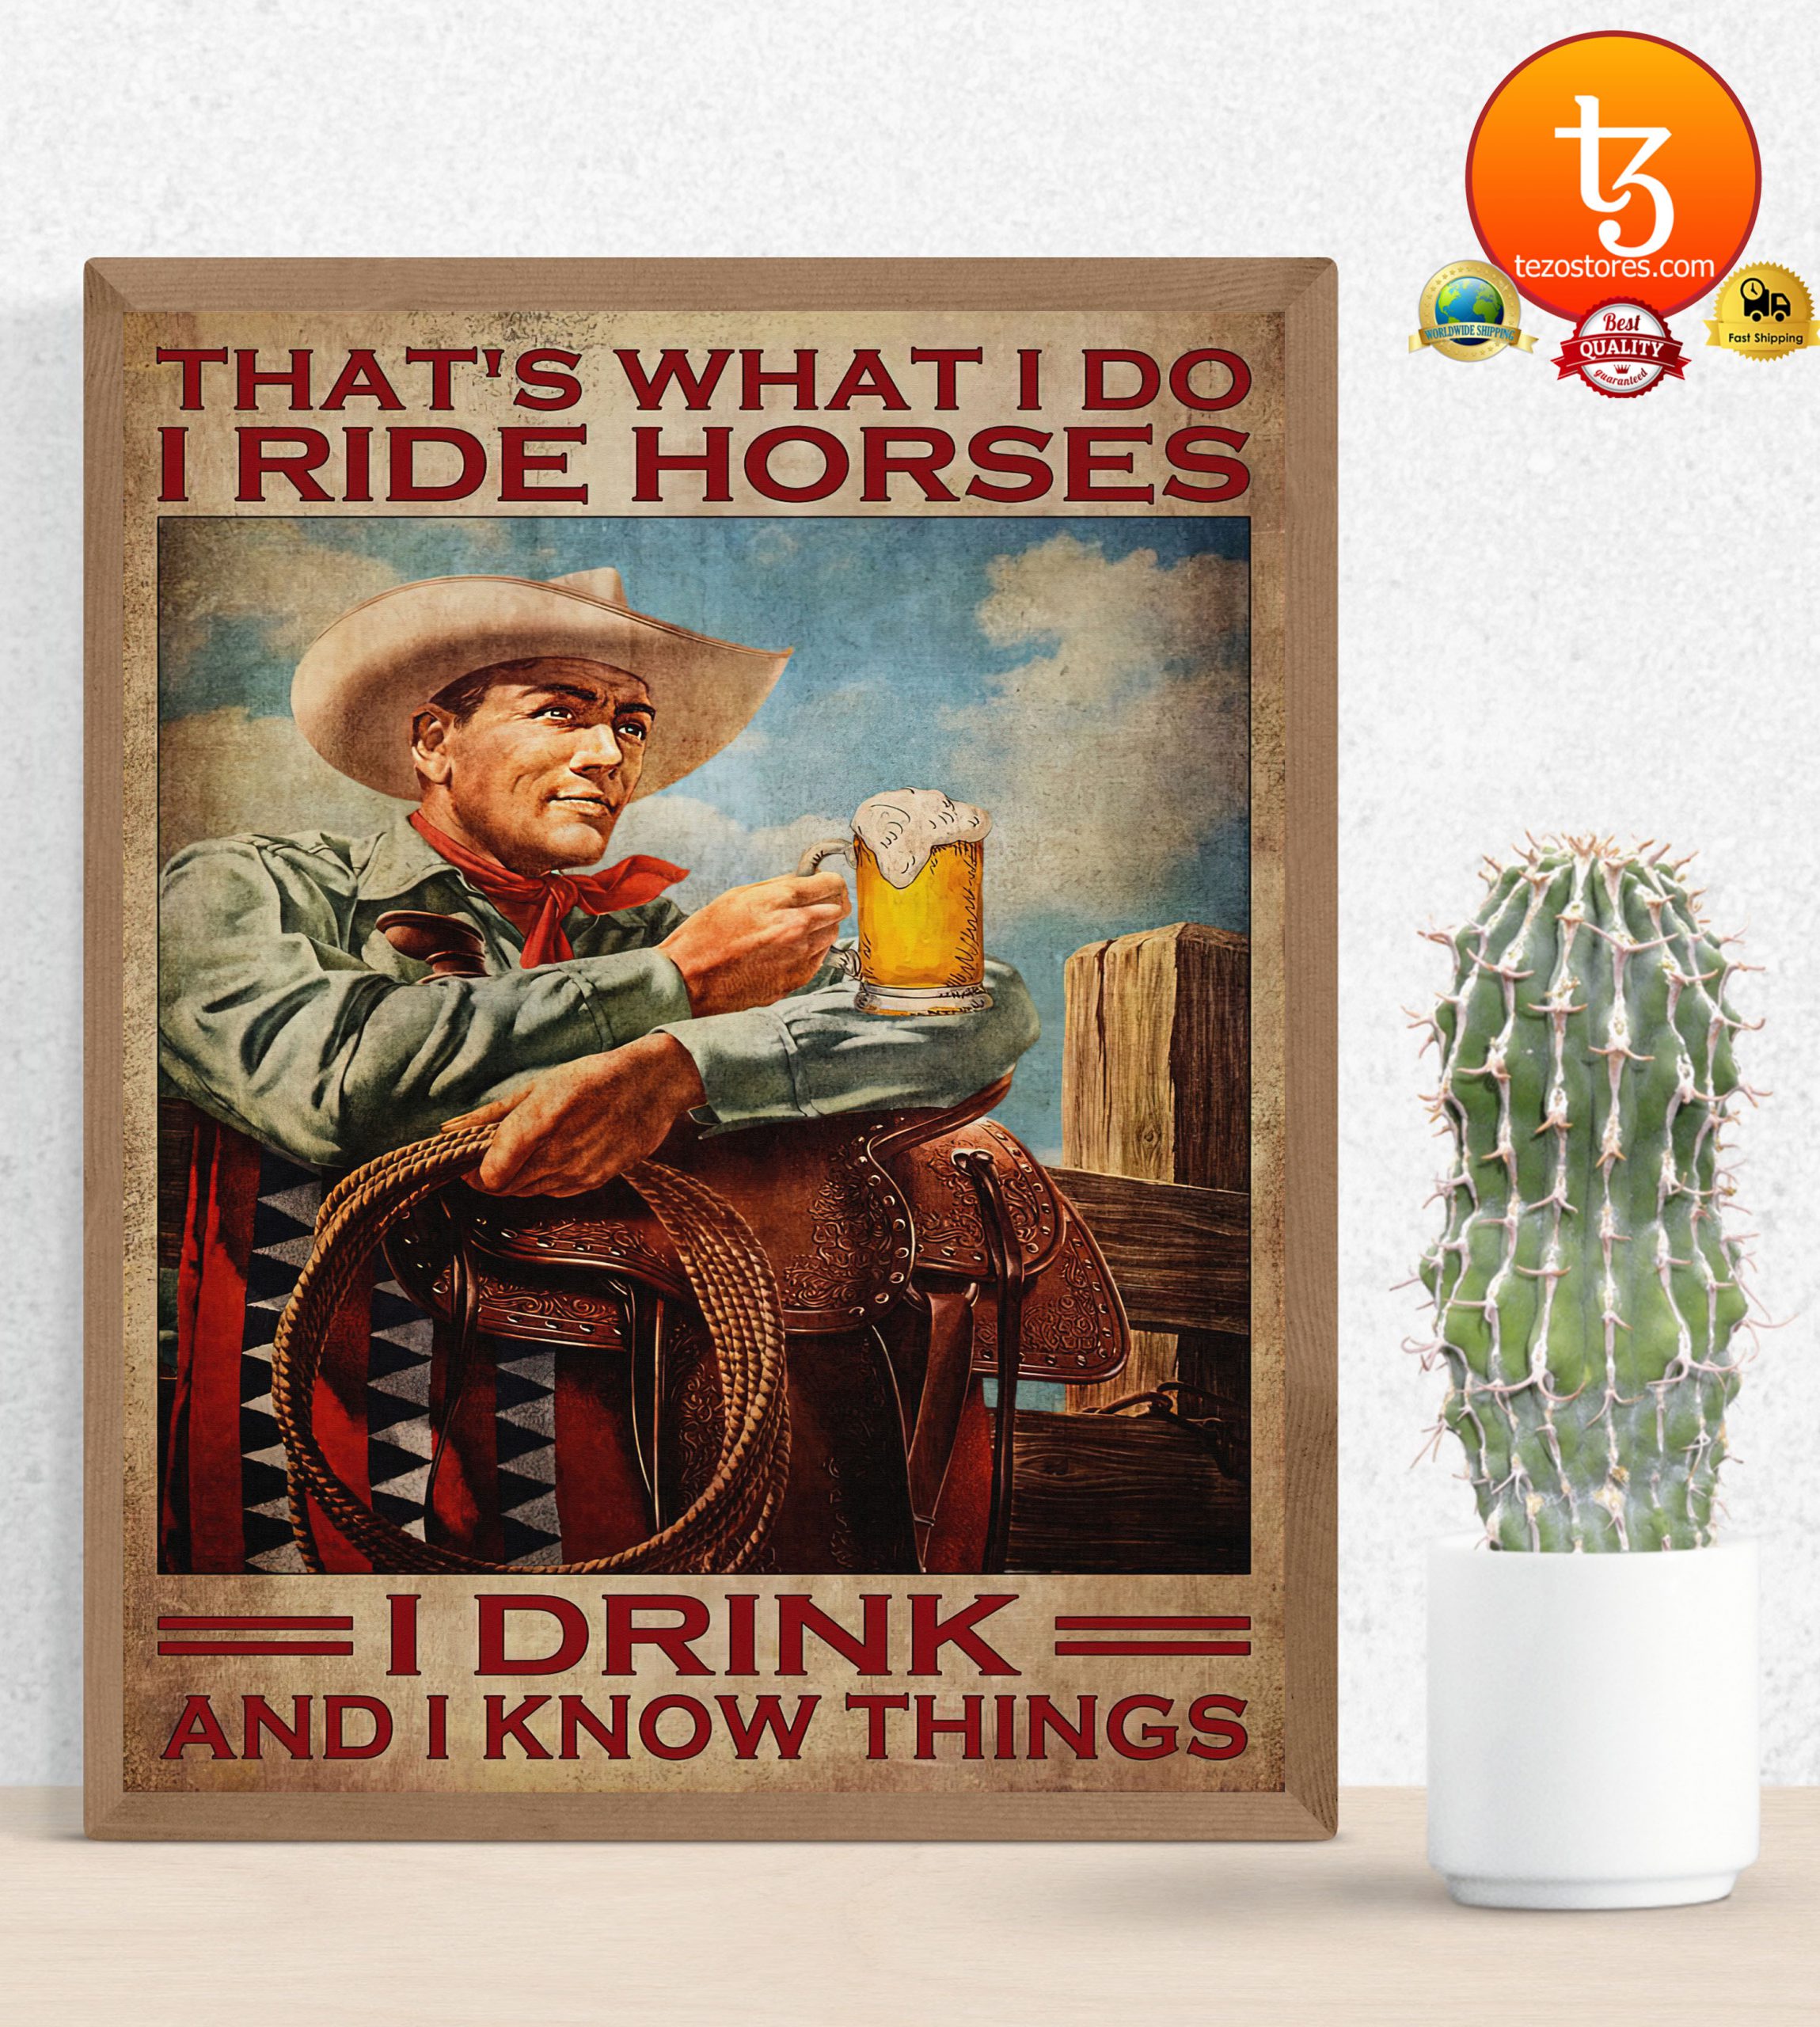 Cowboy Thats what I do I ride horses I drink and I know things poster4